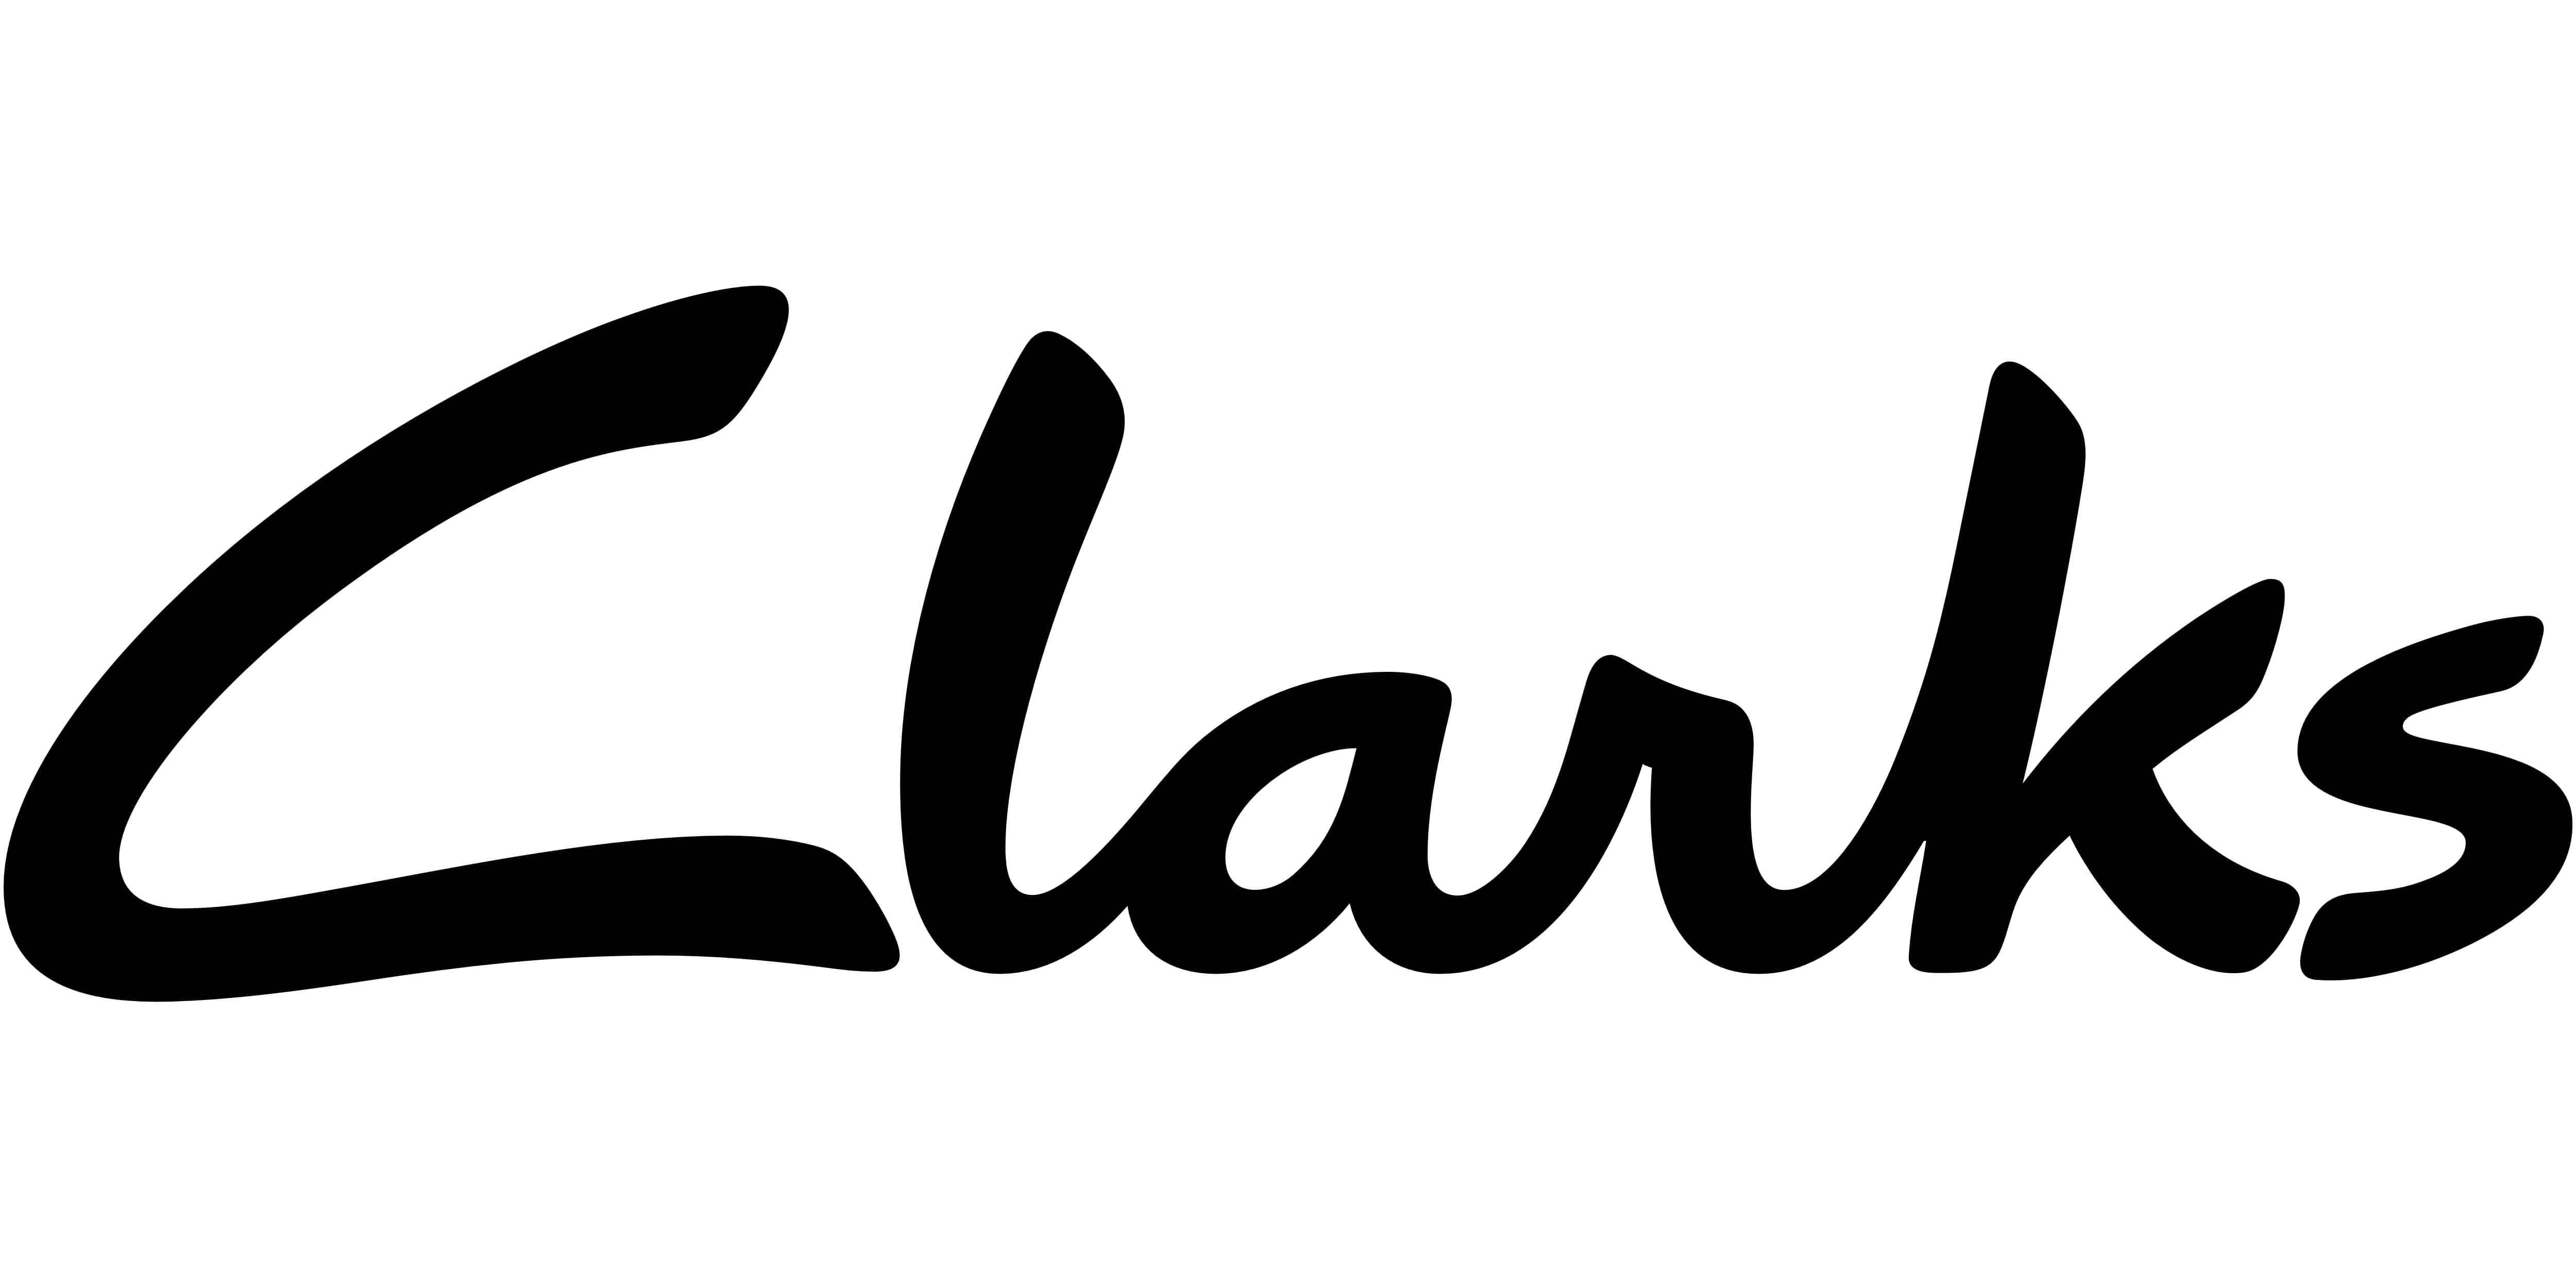 Clarks logo and symbol, meaning 